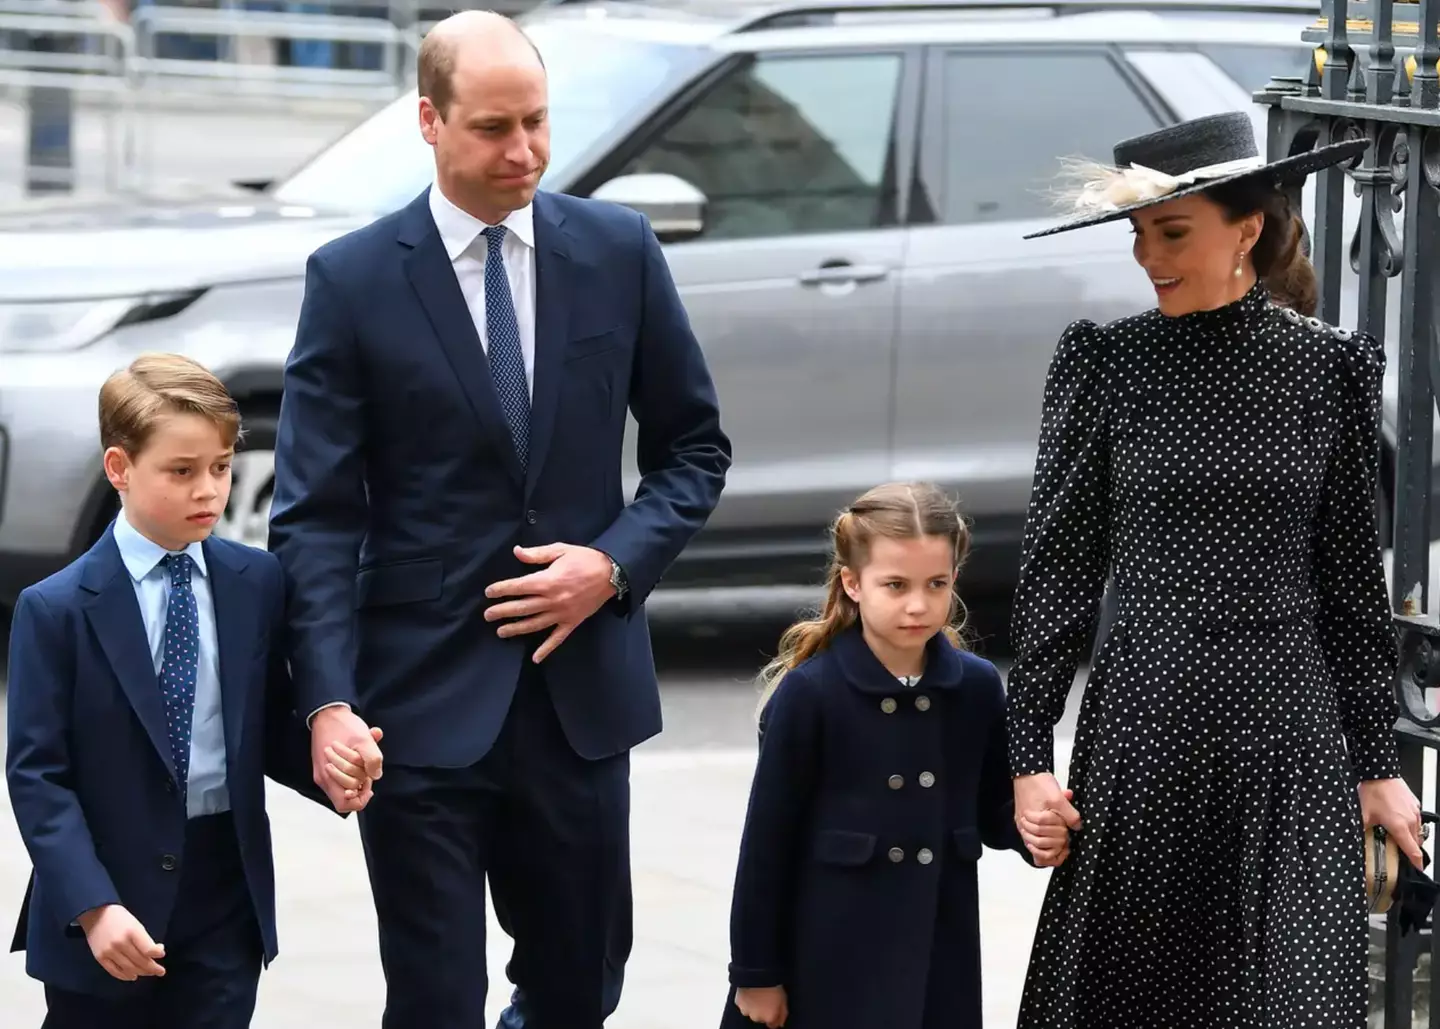 George is second in line to the throne, while Charlotte is third.